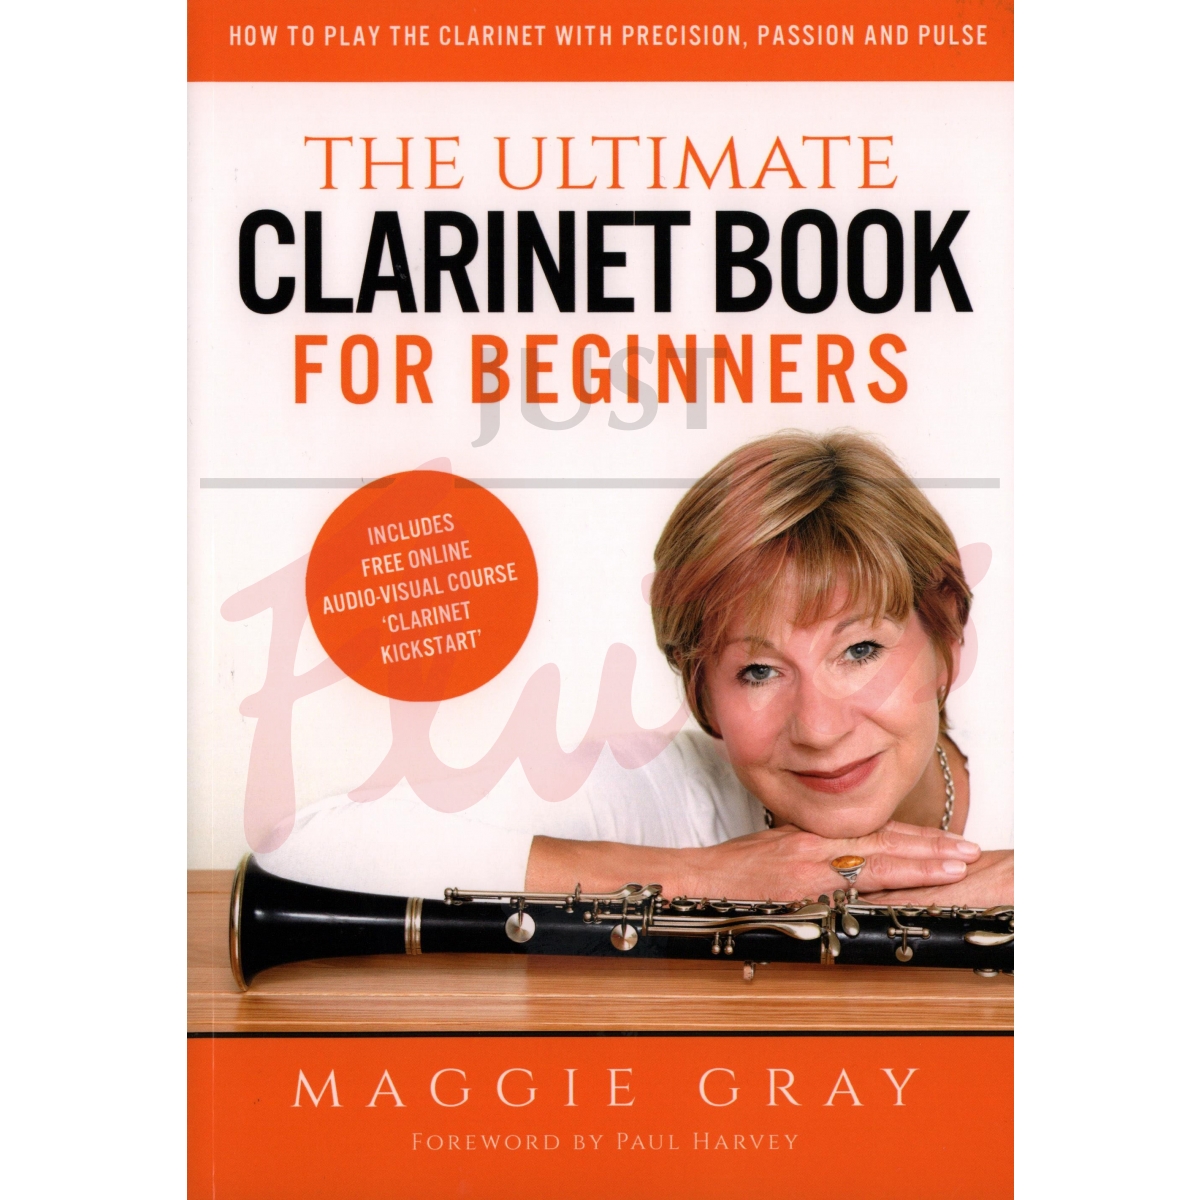 The Ultimate Clarinet Book for Beginners